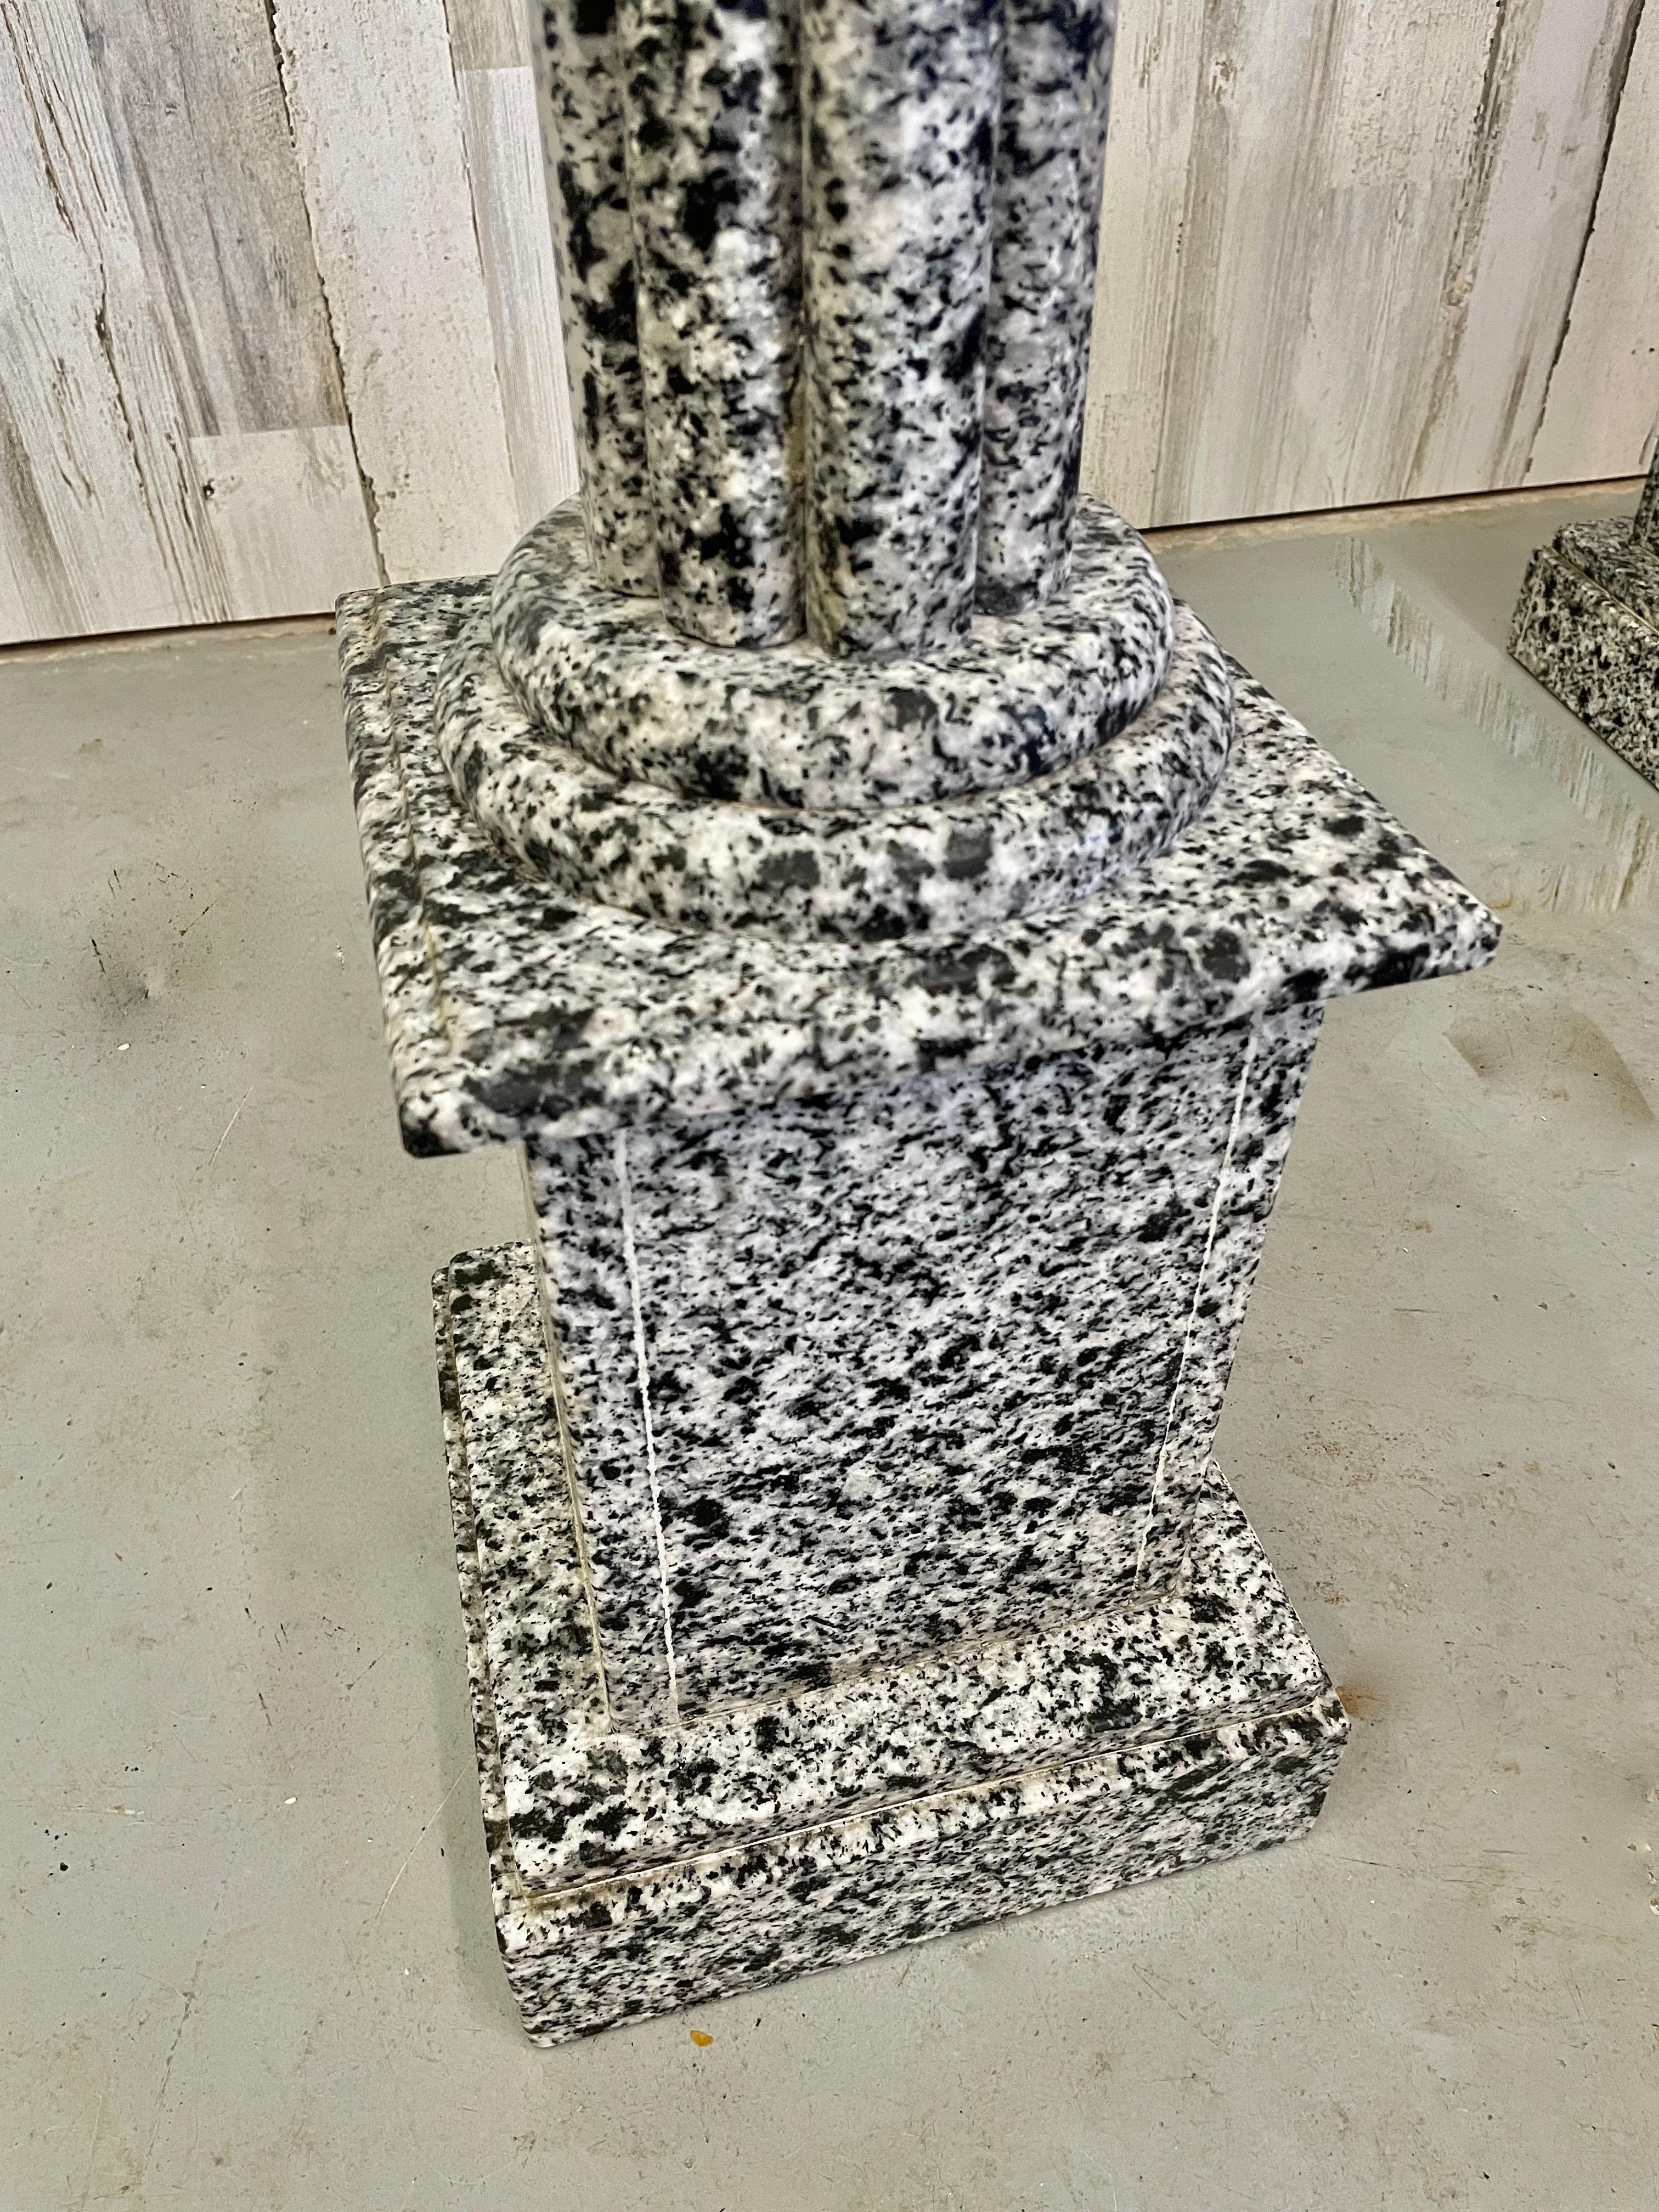 Pair of Dalmation Black and White Speckle Granite Architectural Columns/ Plant Stands.